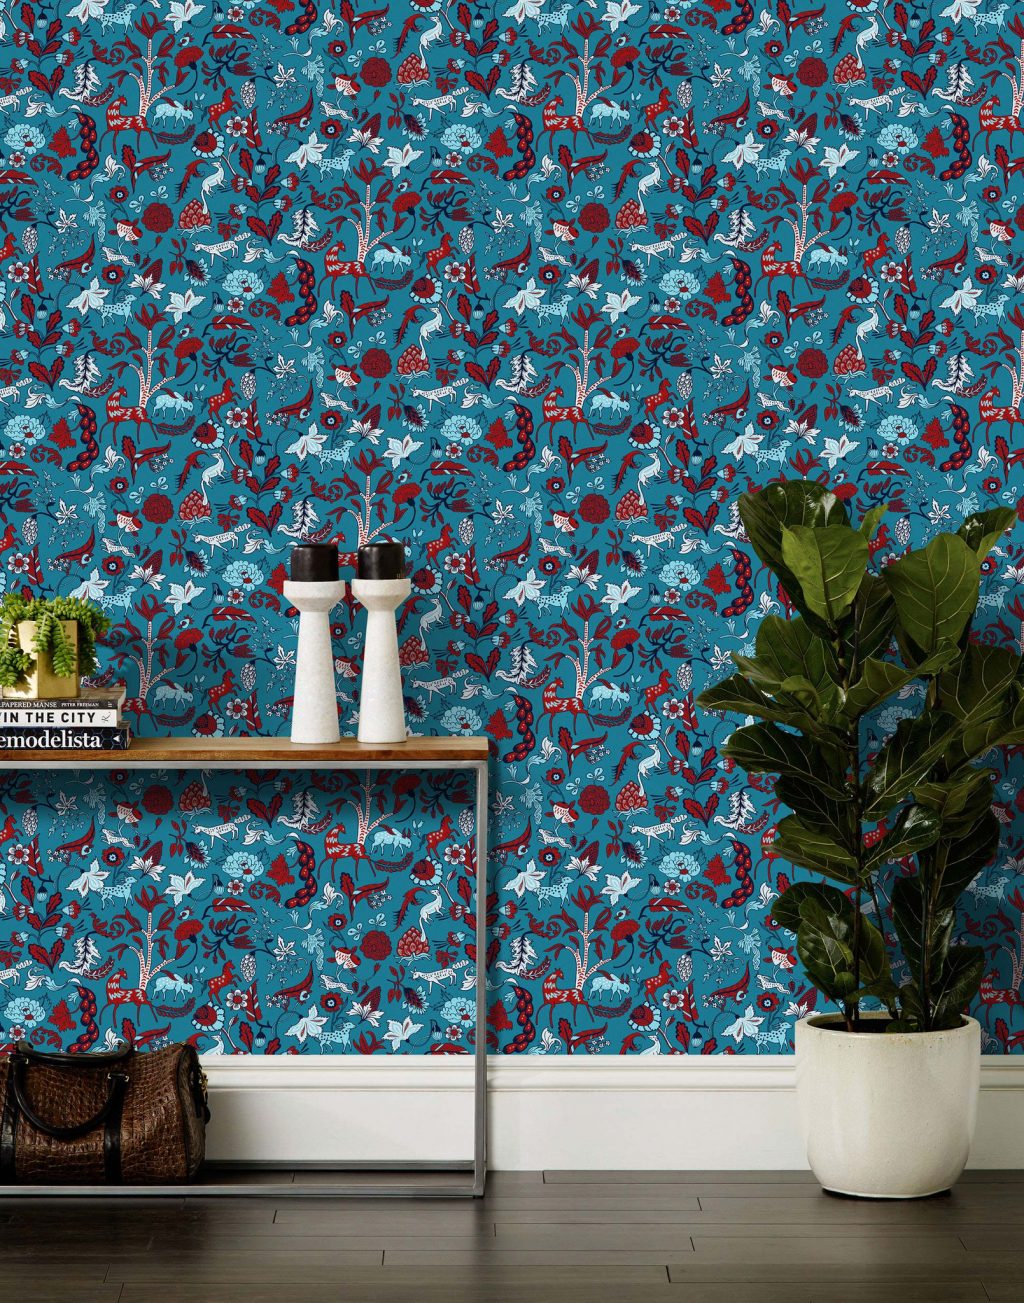 Top Wallpapers You Need for a Cool Home